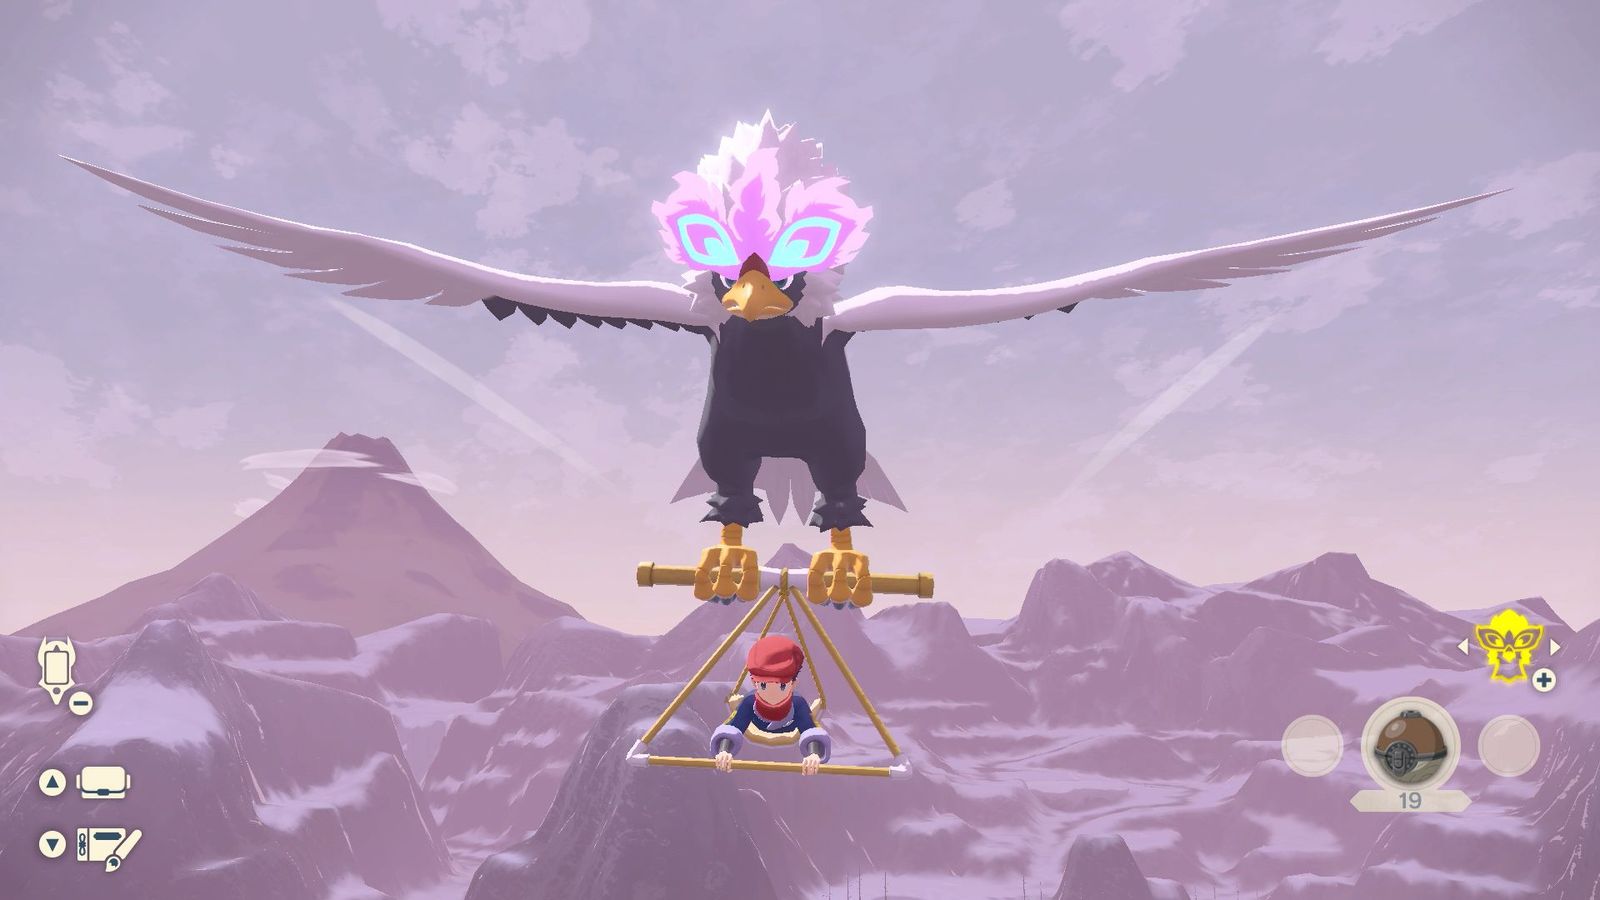 A Pokémon Trainer flying with the Hisuian Braviary in Pokémon Legends: Arceus.